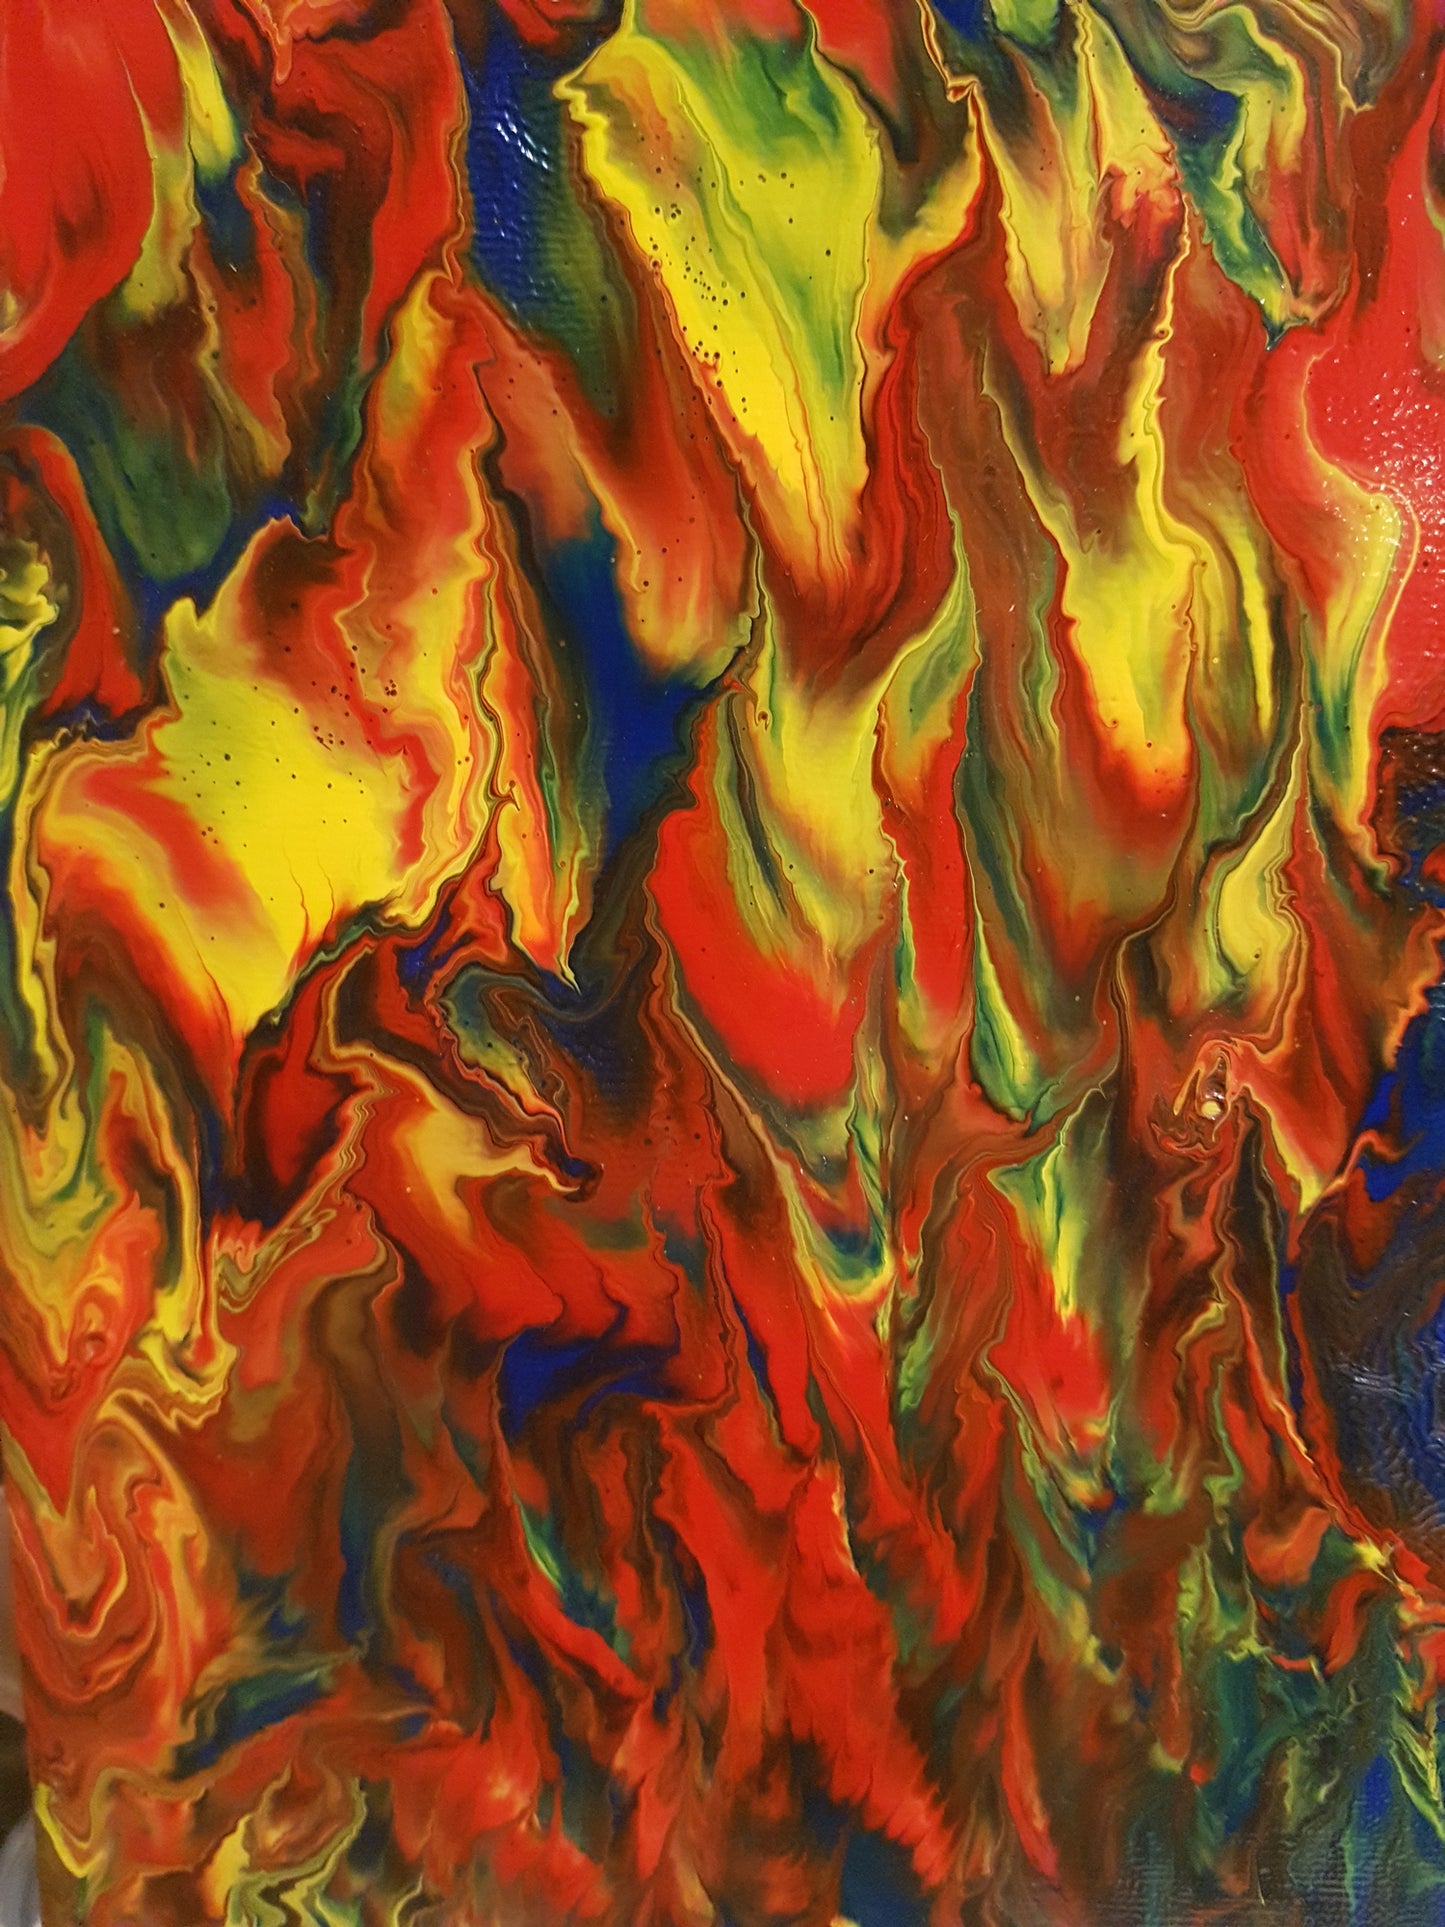 Primary-Flames-of-Passion-by-Alexandra-Romano-Art-Beautiful-Fiery-Abstract-Paintings-Sale-Blue-Red-Yellow-Colorful-Acrylics